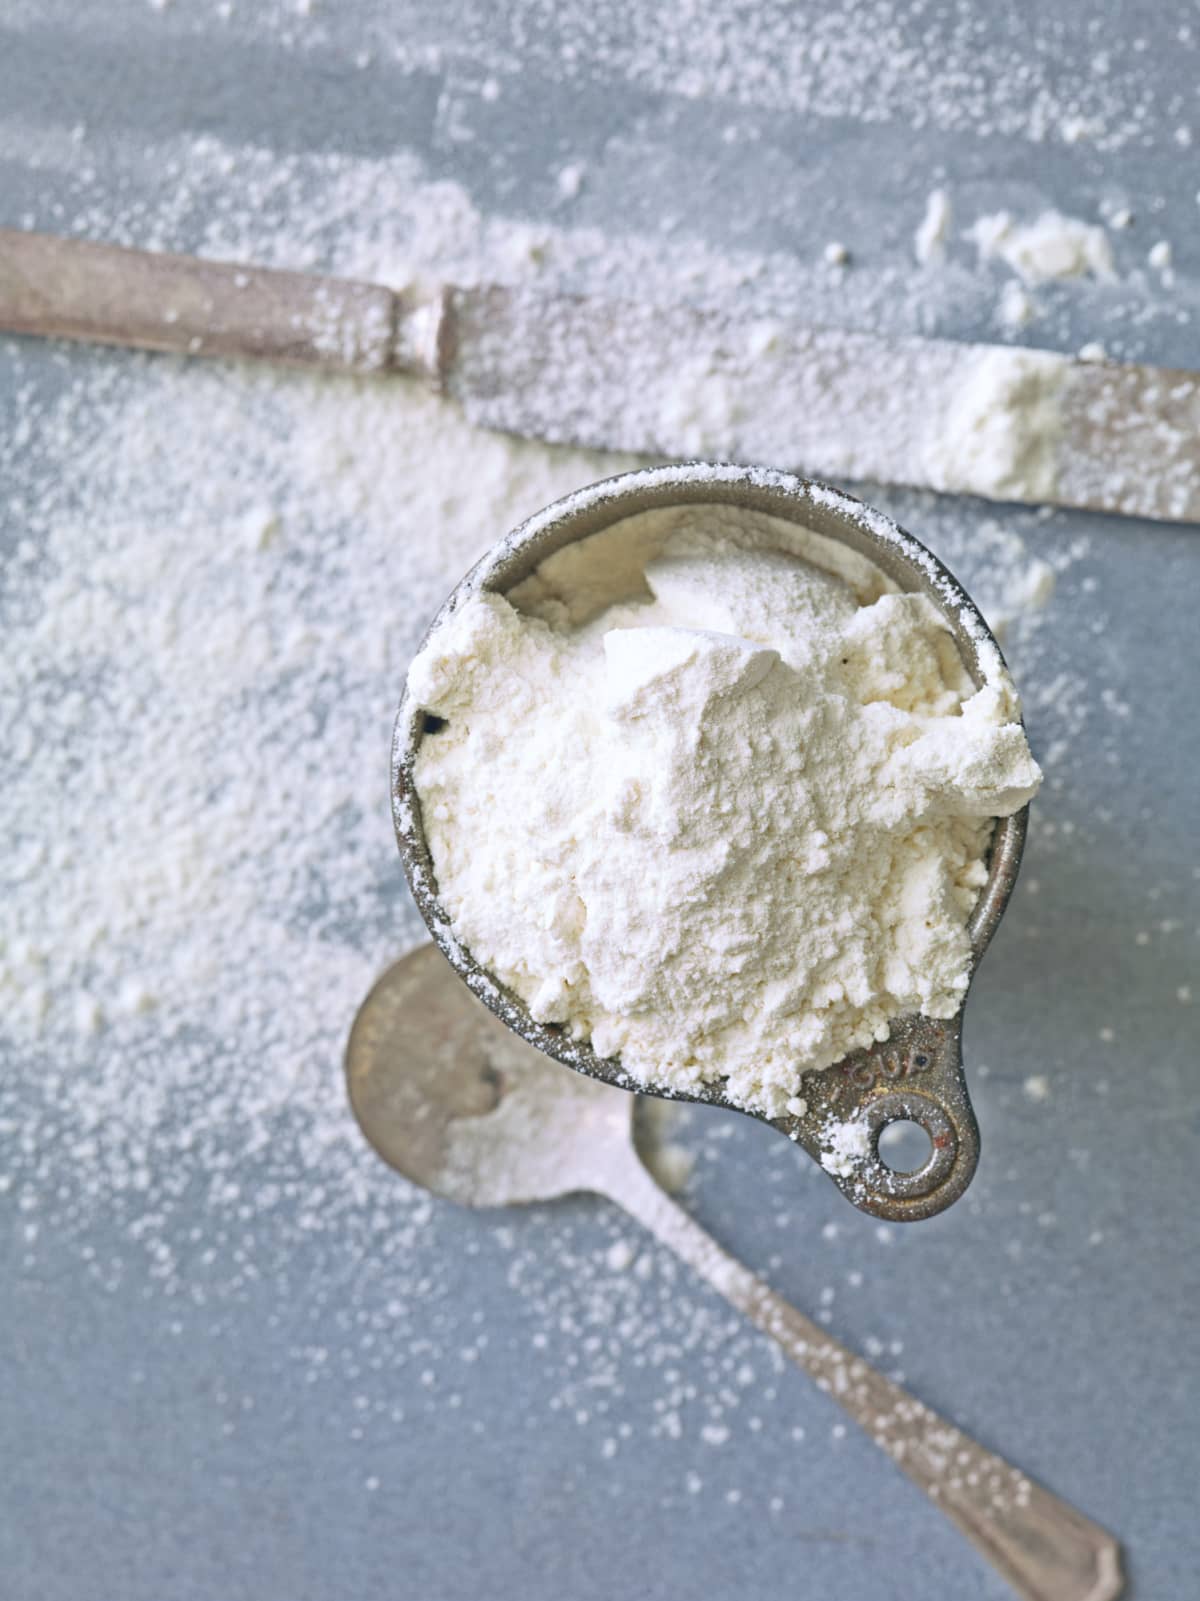 Bowl of flour with flour scattered on counter